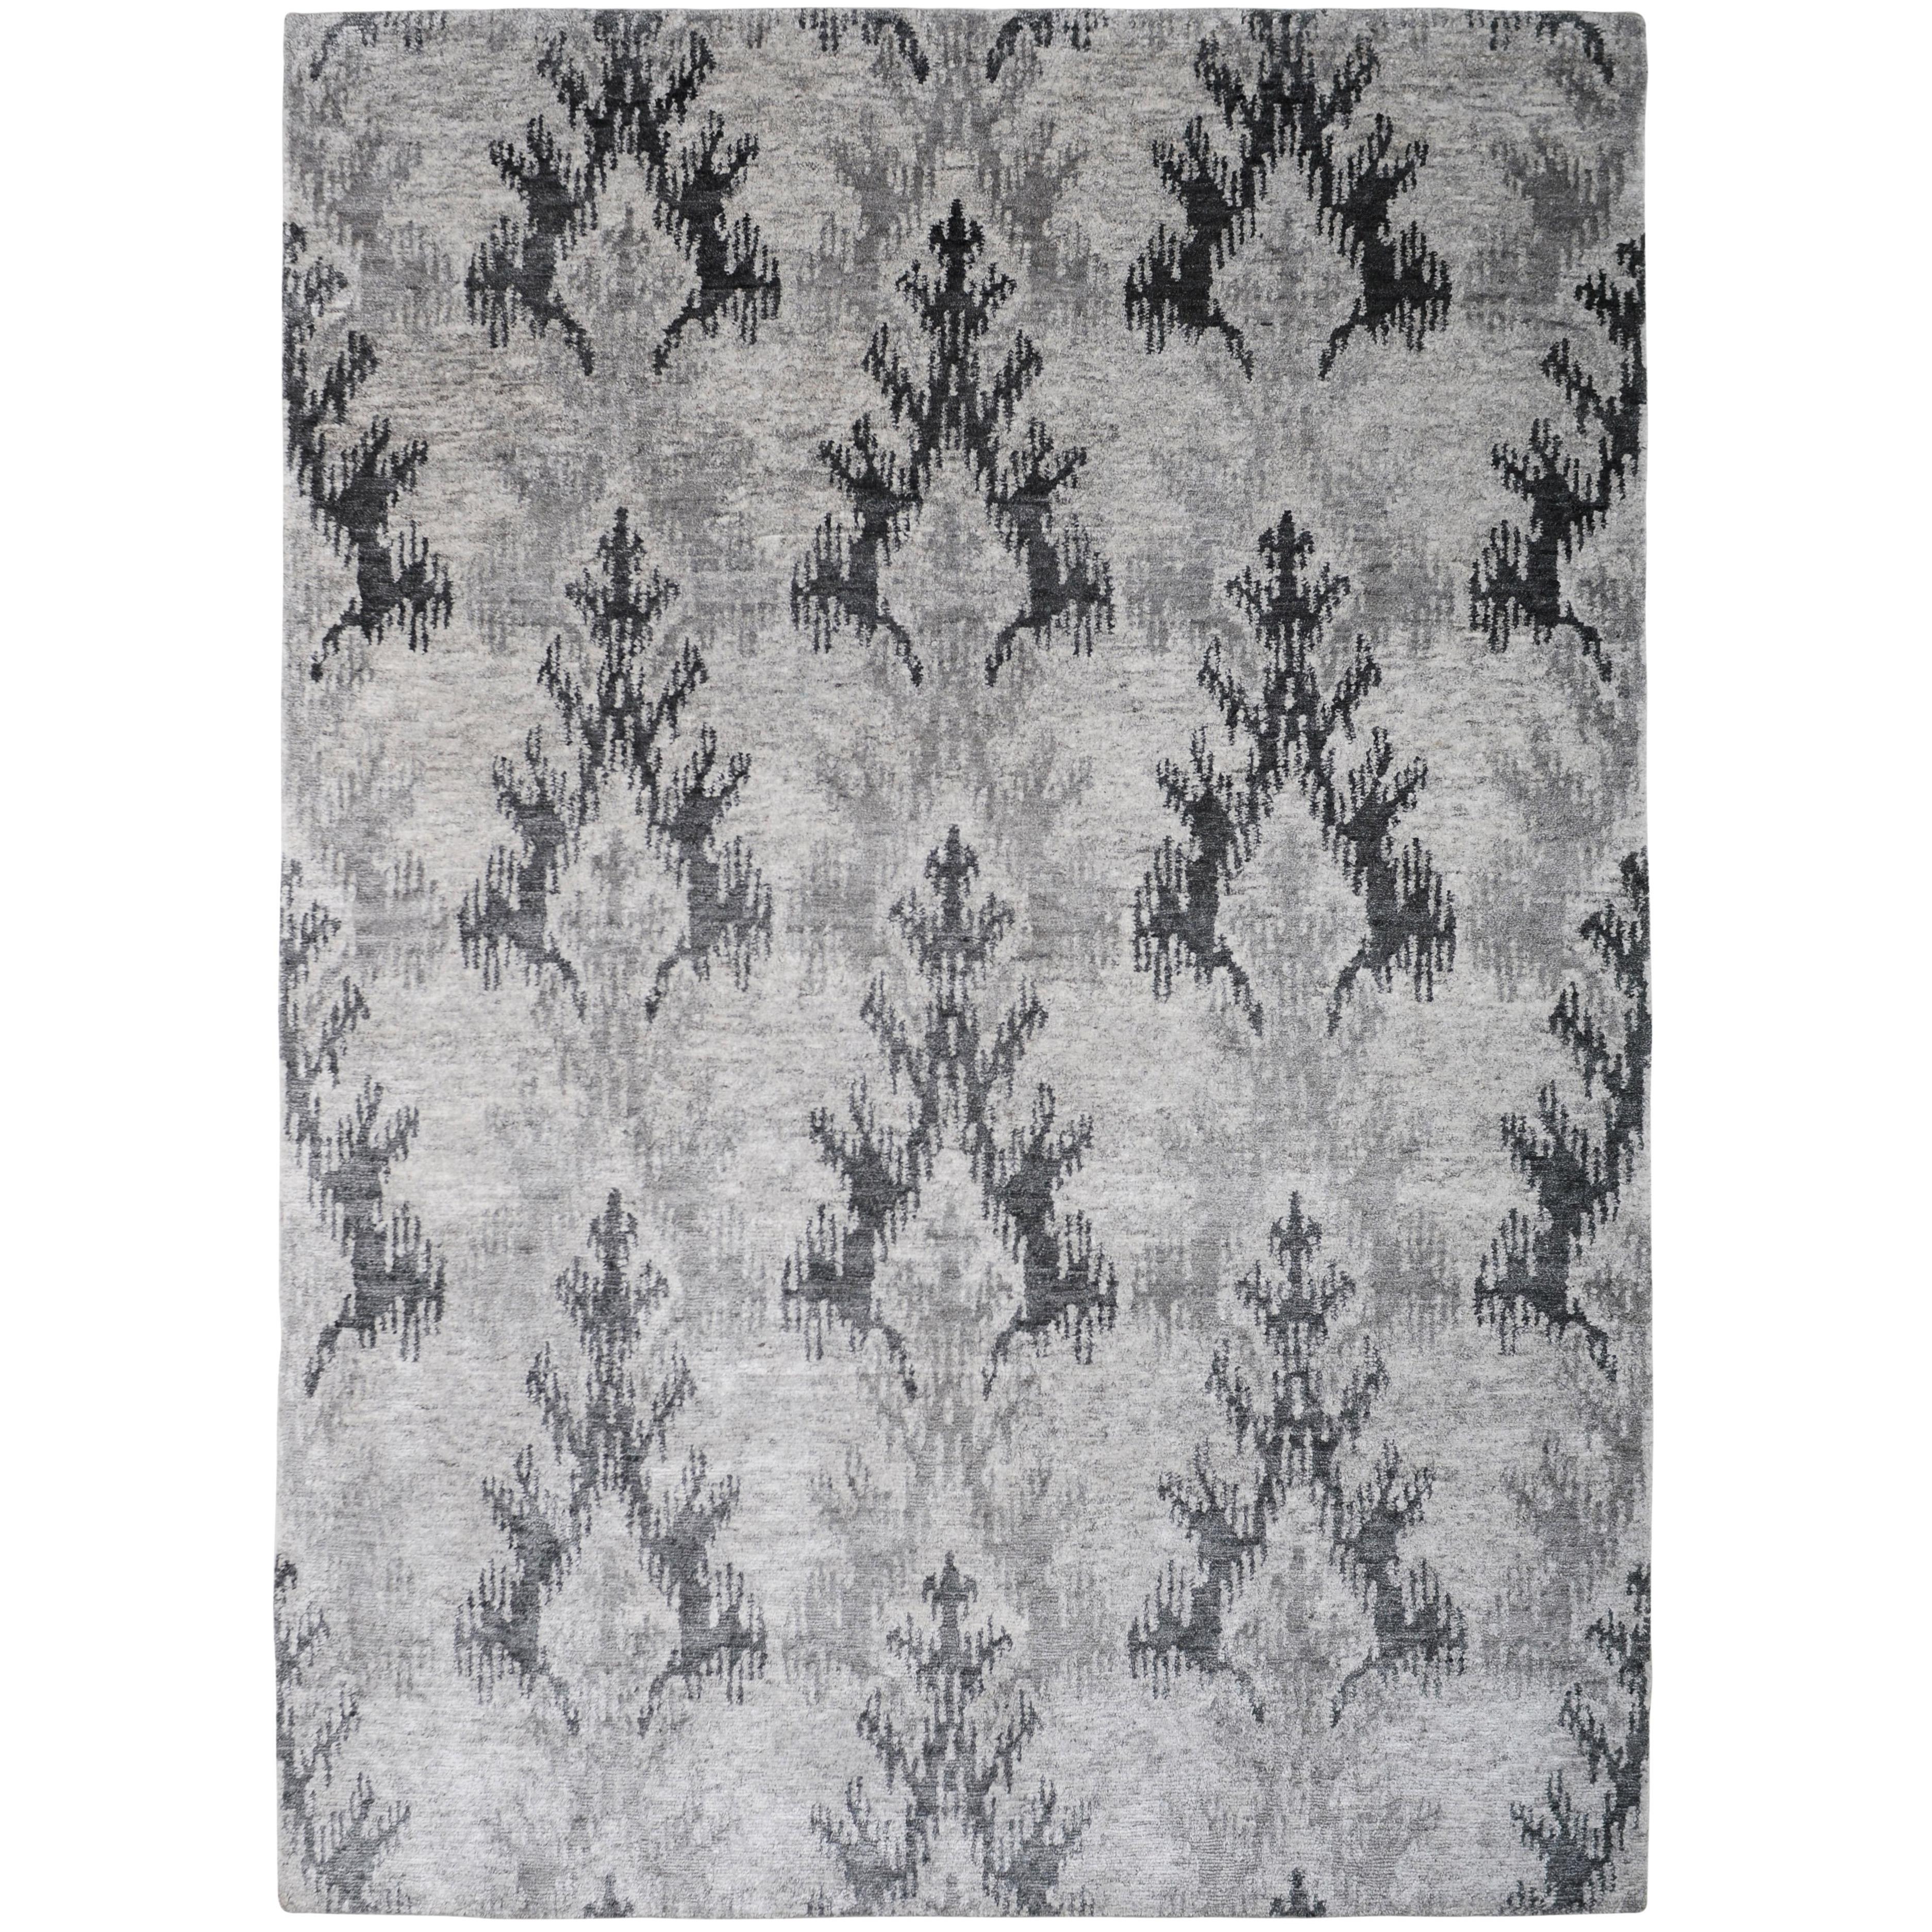 Ikat Bamboo Charcoal Hand-Knotted 10x8 Rug in Silk by The Rug Company